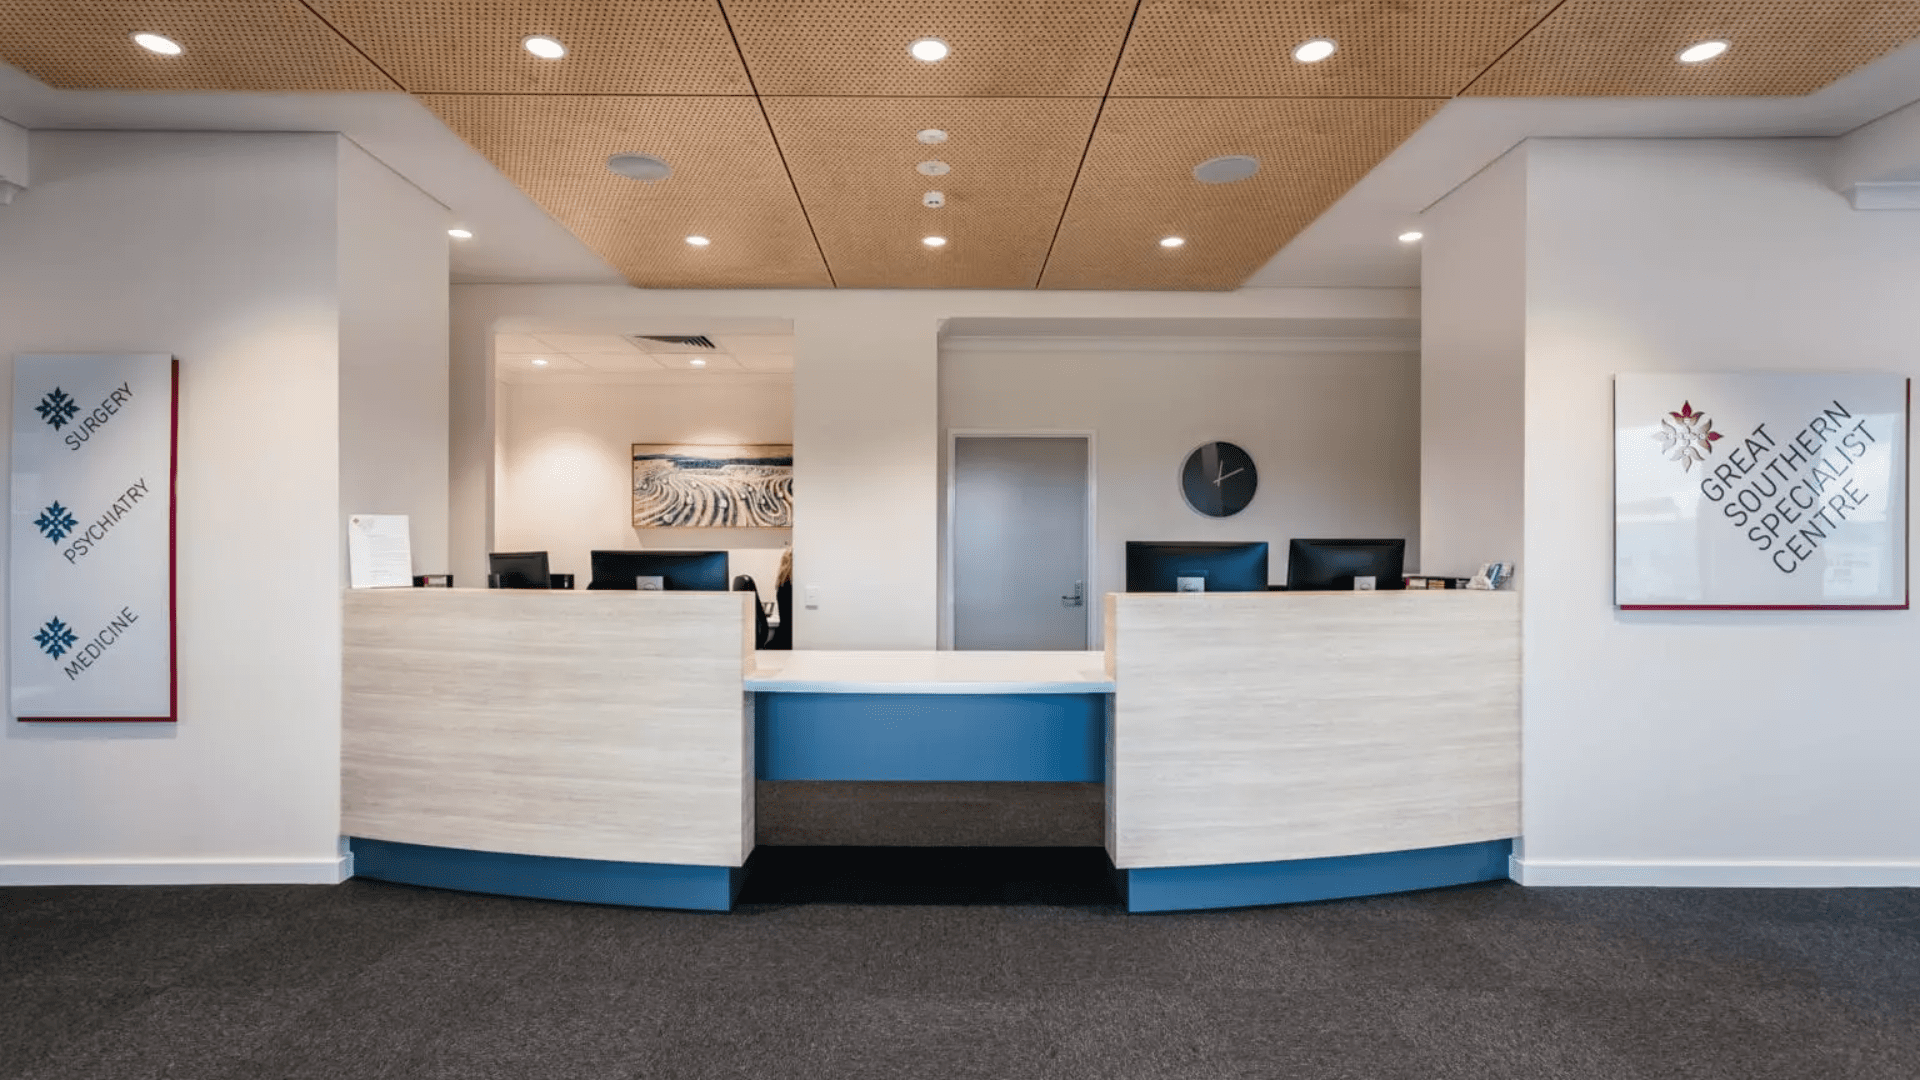 great southern specialist centre medical centre branding and interior